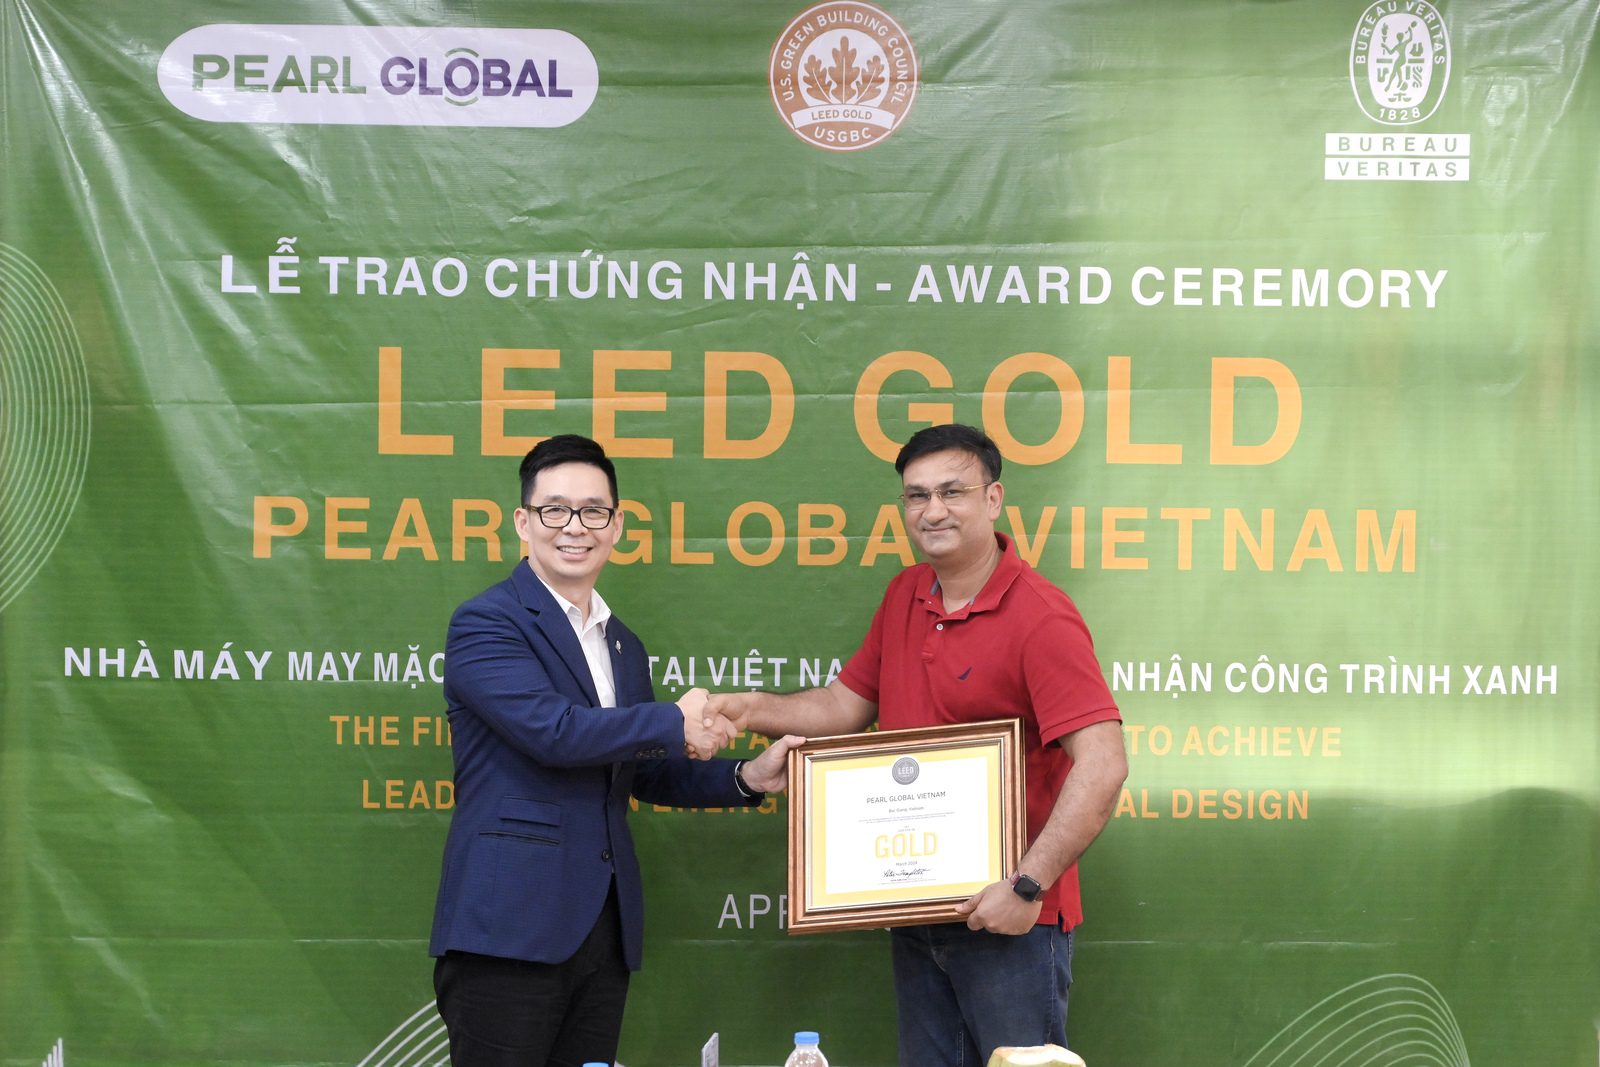 Bureau veritas successfully supported Vietnam's first garment factory to achieve LEED O&M Gold 